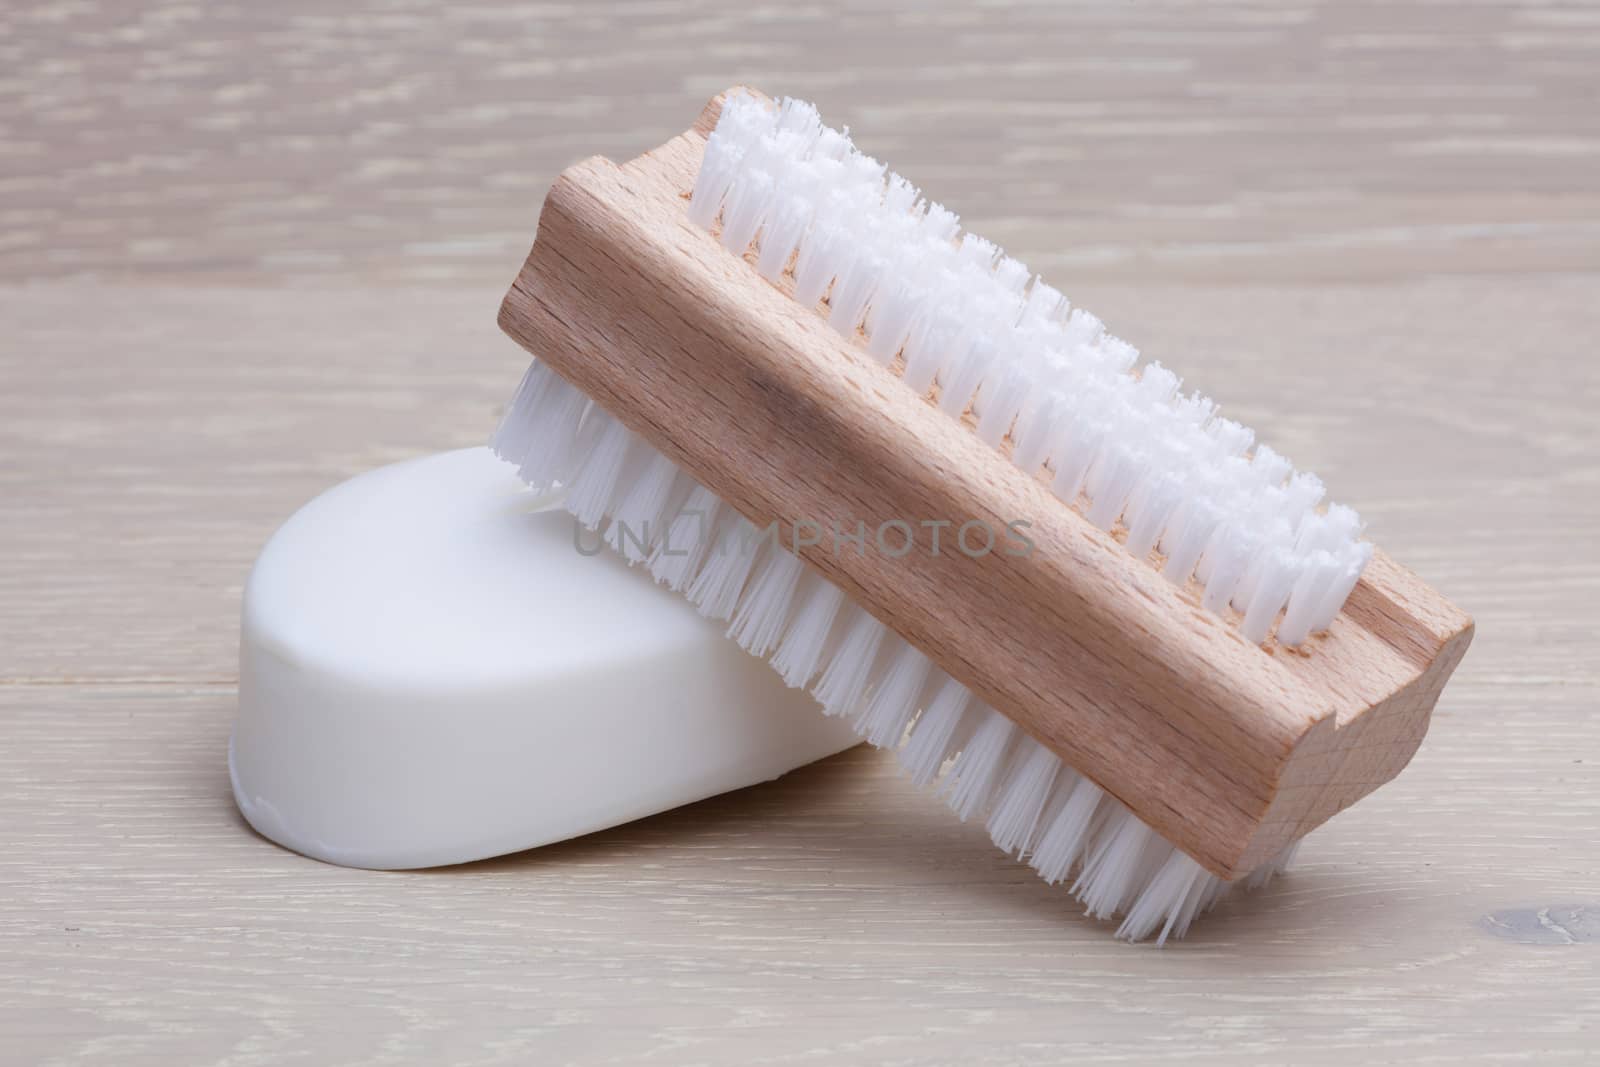 A classic wooden nail brush and soap on wood background